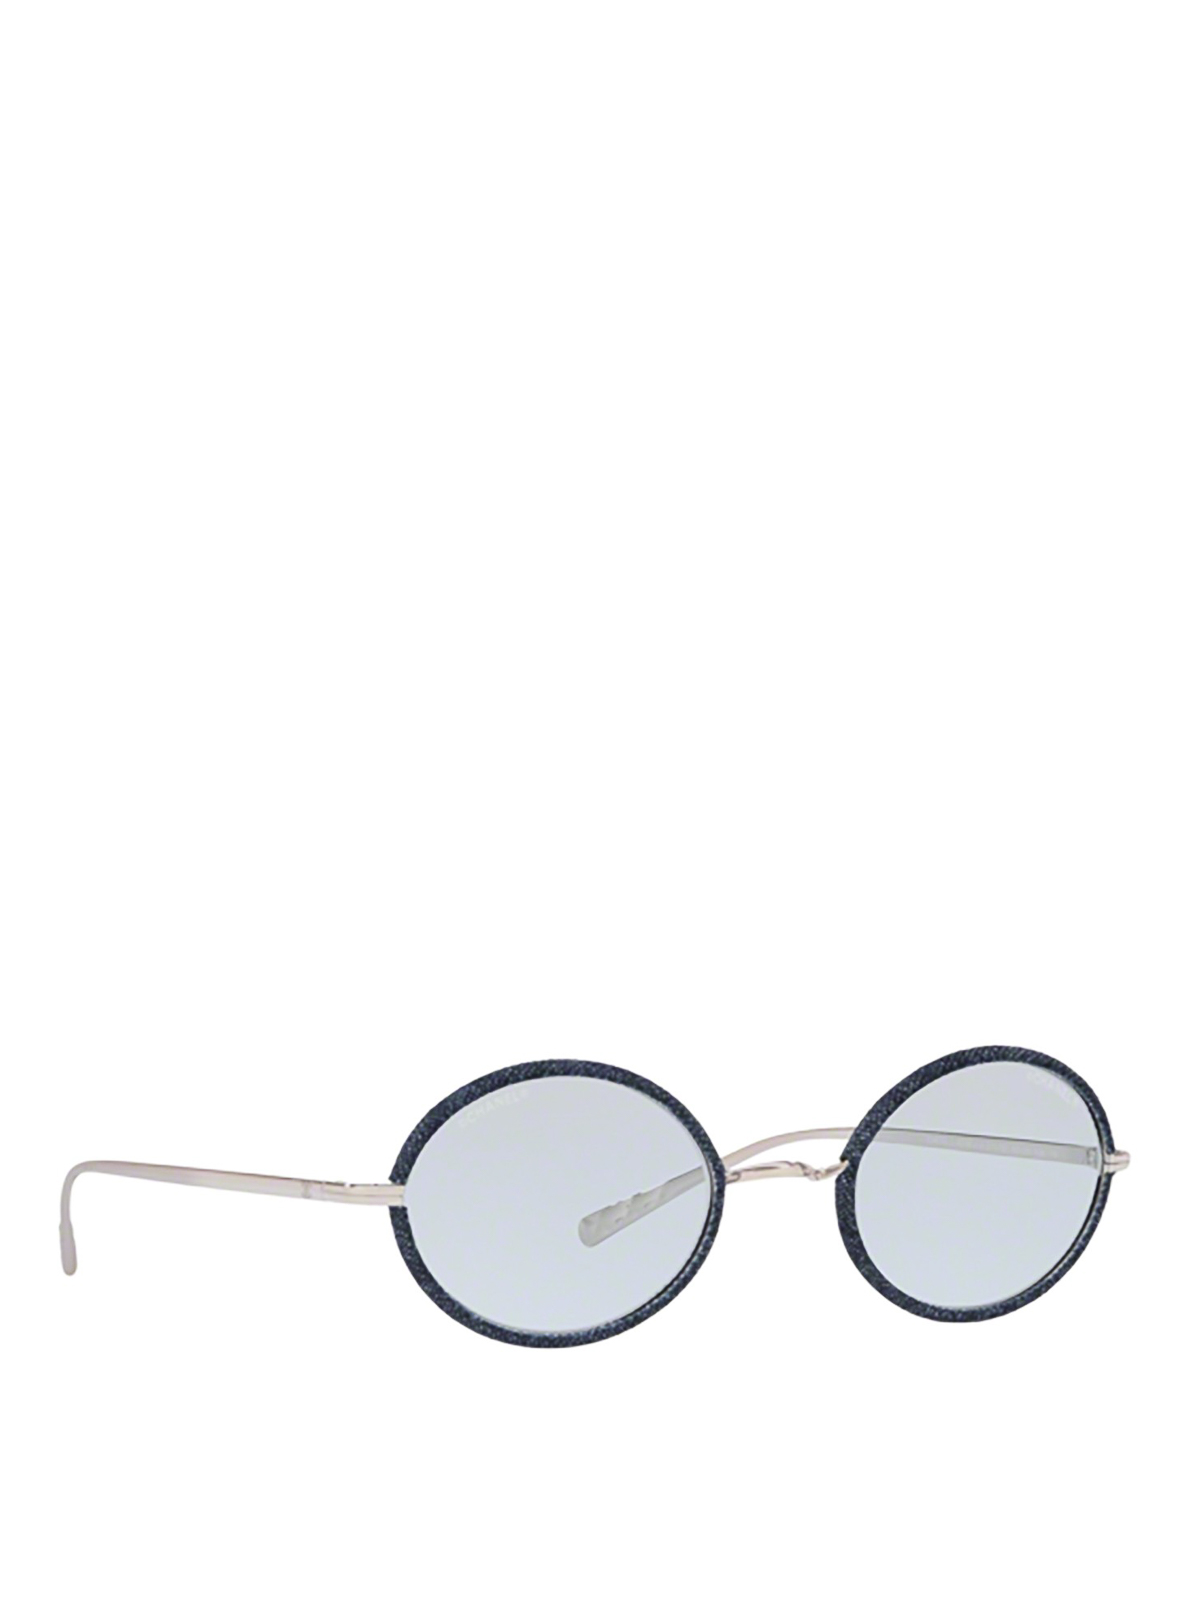 Denim and metal rounded sunglasses